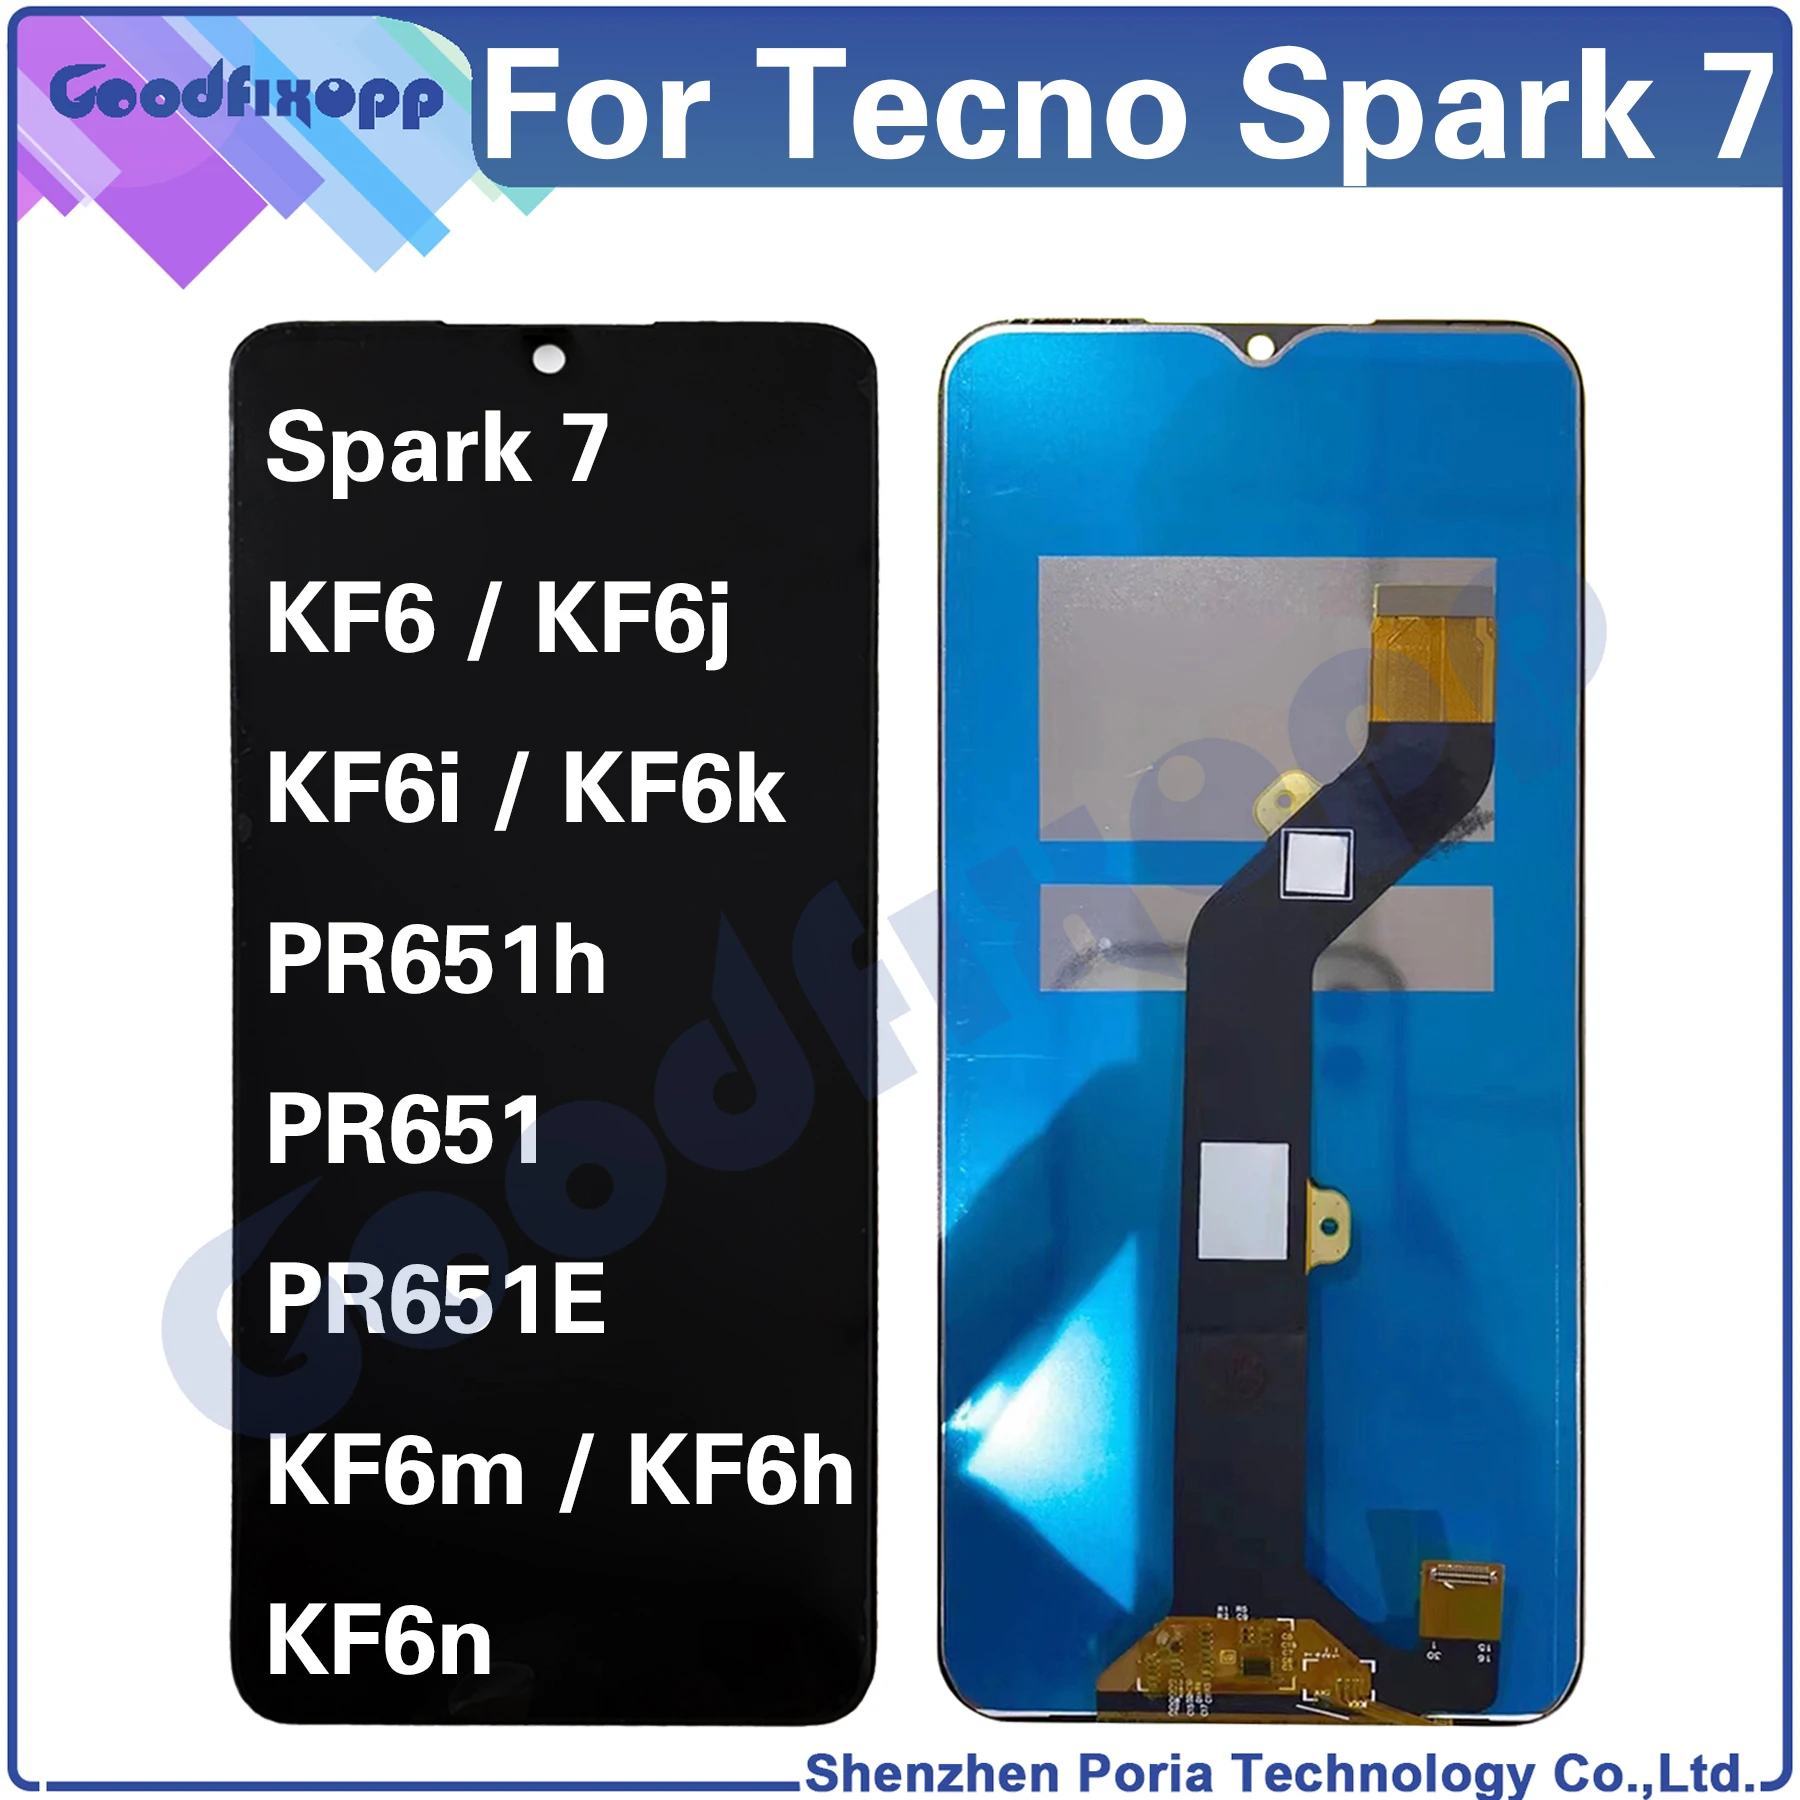 

For Tecno Spark 7 KF6 KF6j KF6i KF6k PR651h PR651 PR651E KF6m KF6h KF6n Spark7 LCD Display Touch Screen Digitizer Assembly